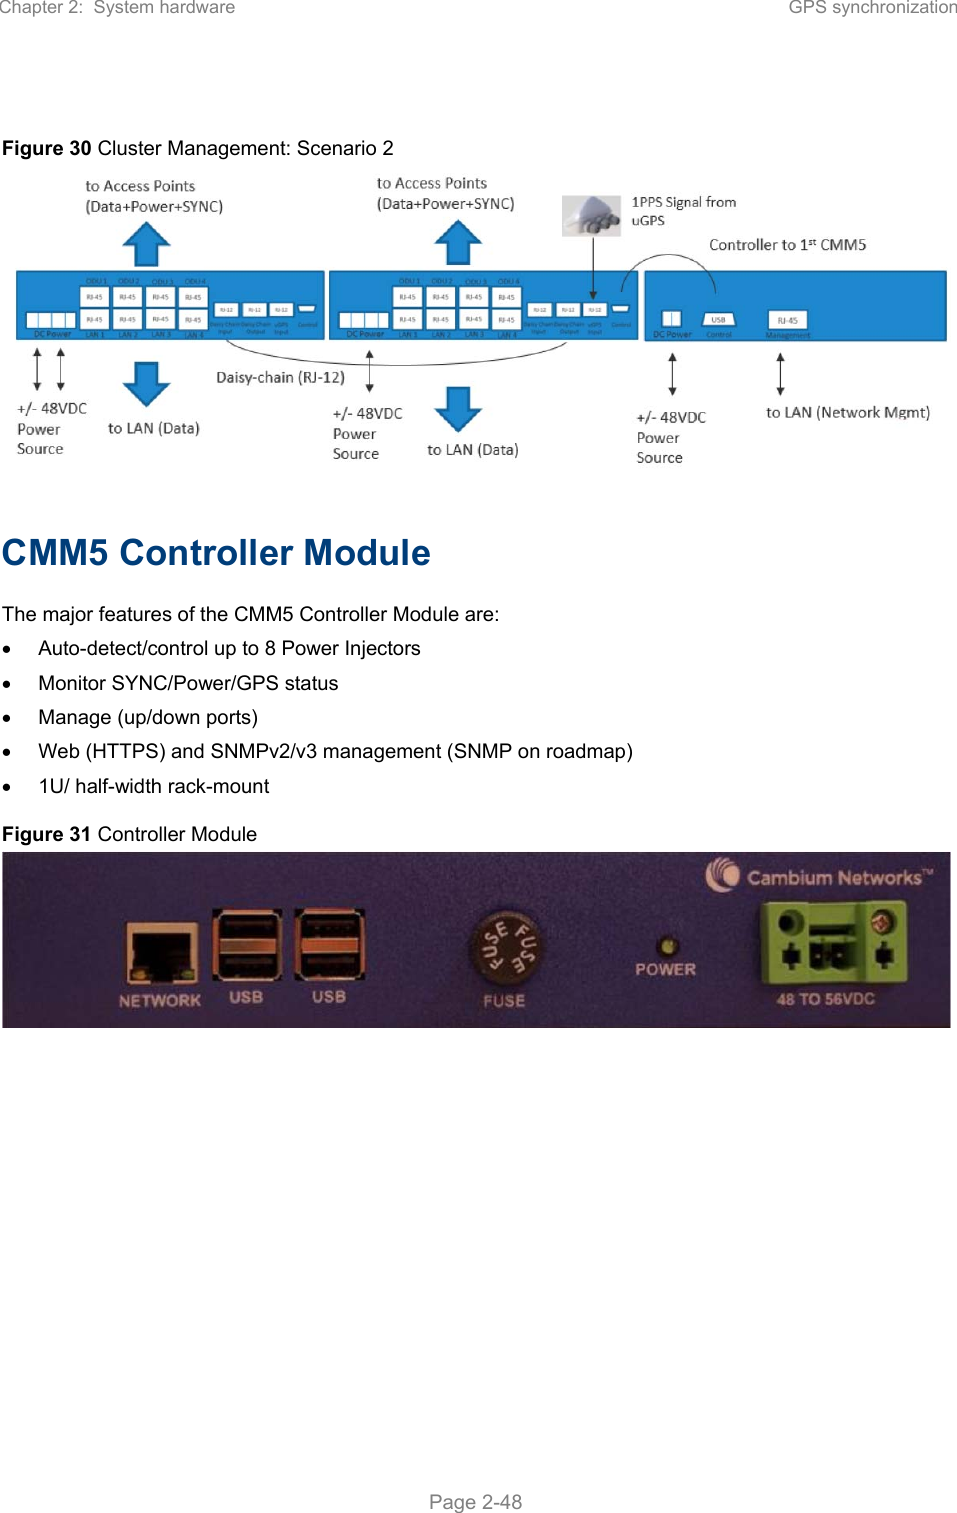 Chapter 2:  System hardware  GPS synchronization   Page 2-48  Figure 30 Cluster Management: Scenario 2  CMM5 Controller Module The major features of the CMM5 Controller Module are:   Auto-detect/control up to 8 Power Injectors   Monitor SYNC/Power/GPS status   Manage (up/down ports)   Web (HTTPS) and SNMPv2/v3 management (SNMP on roadmap)   1U/ half-width rack-mount Figure 31 Controller Module    